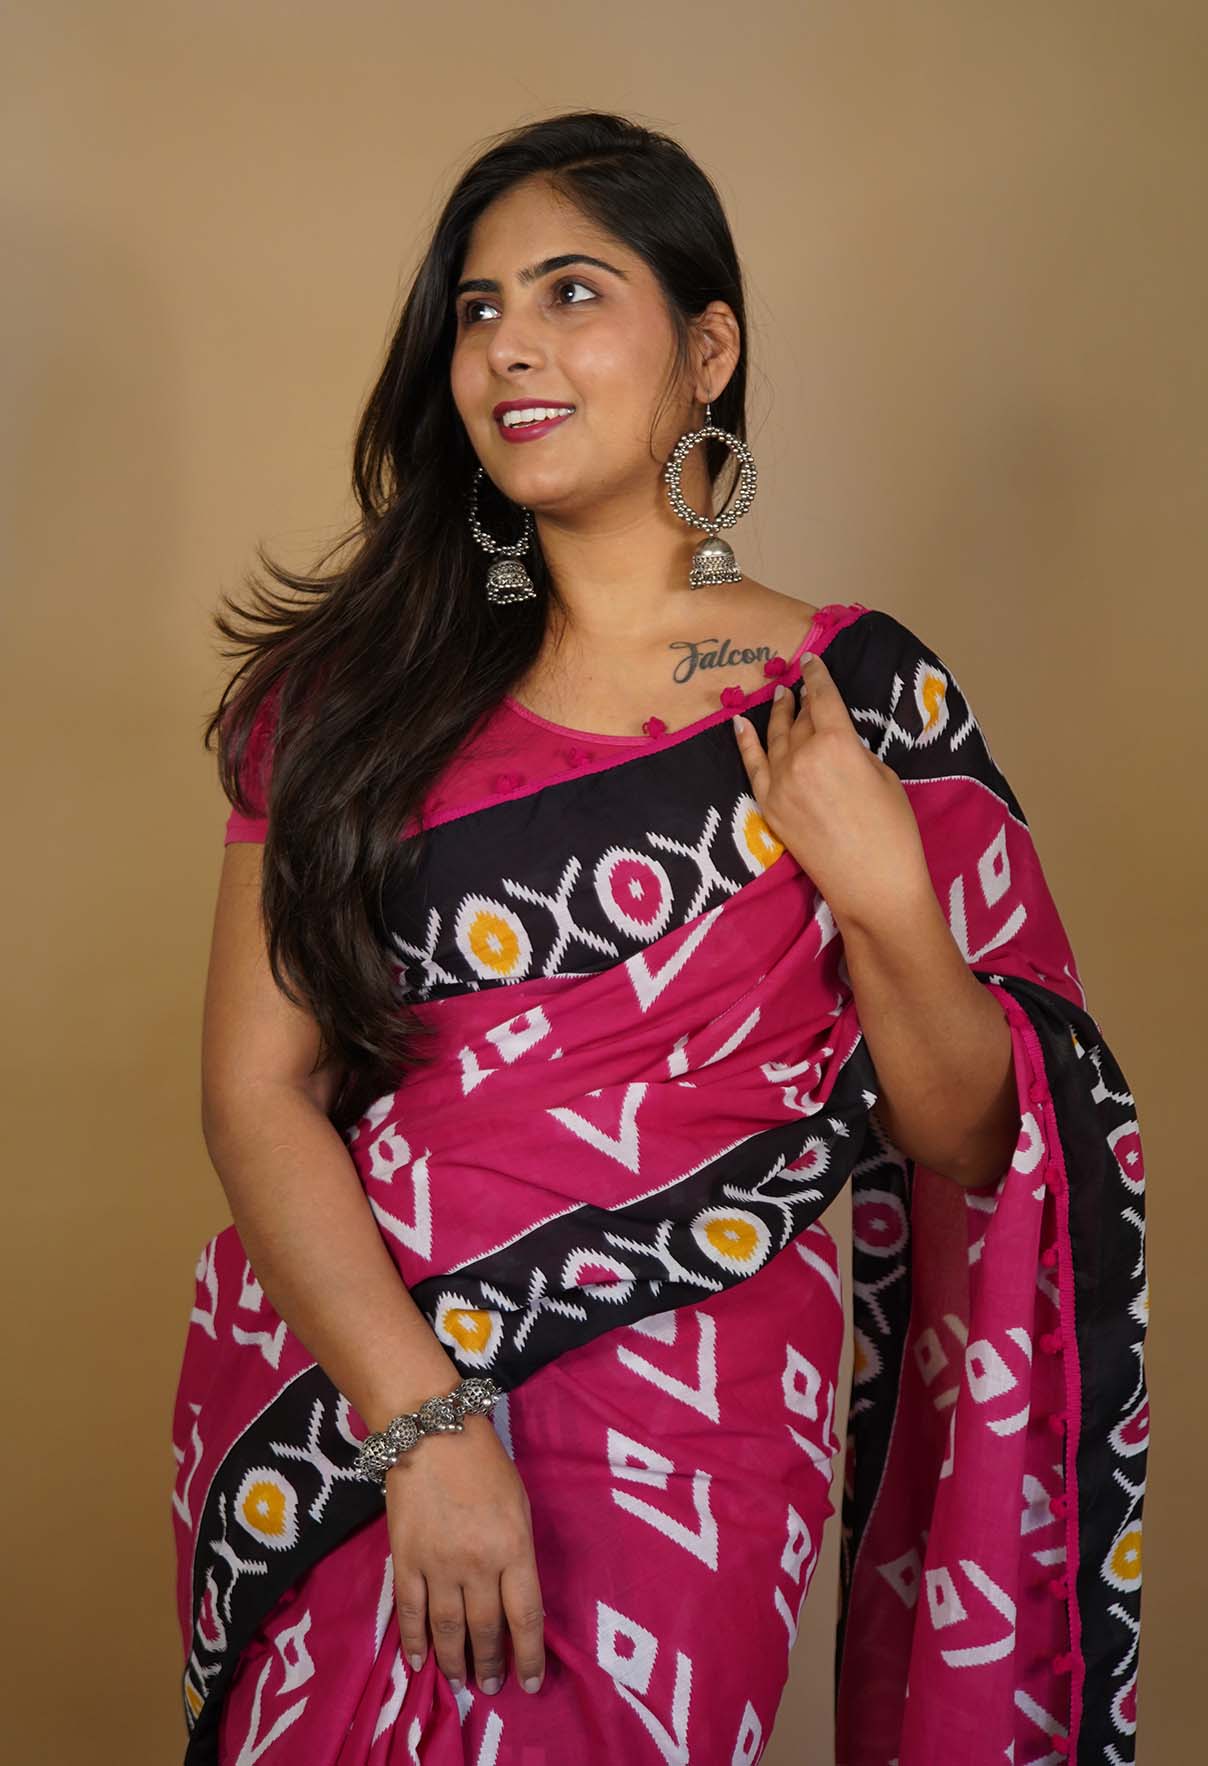 PINK & BLACK COTTON MUL MUL PRINTED WRAP IN 1 MINUTE SAREE WITH POMPOM